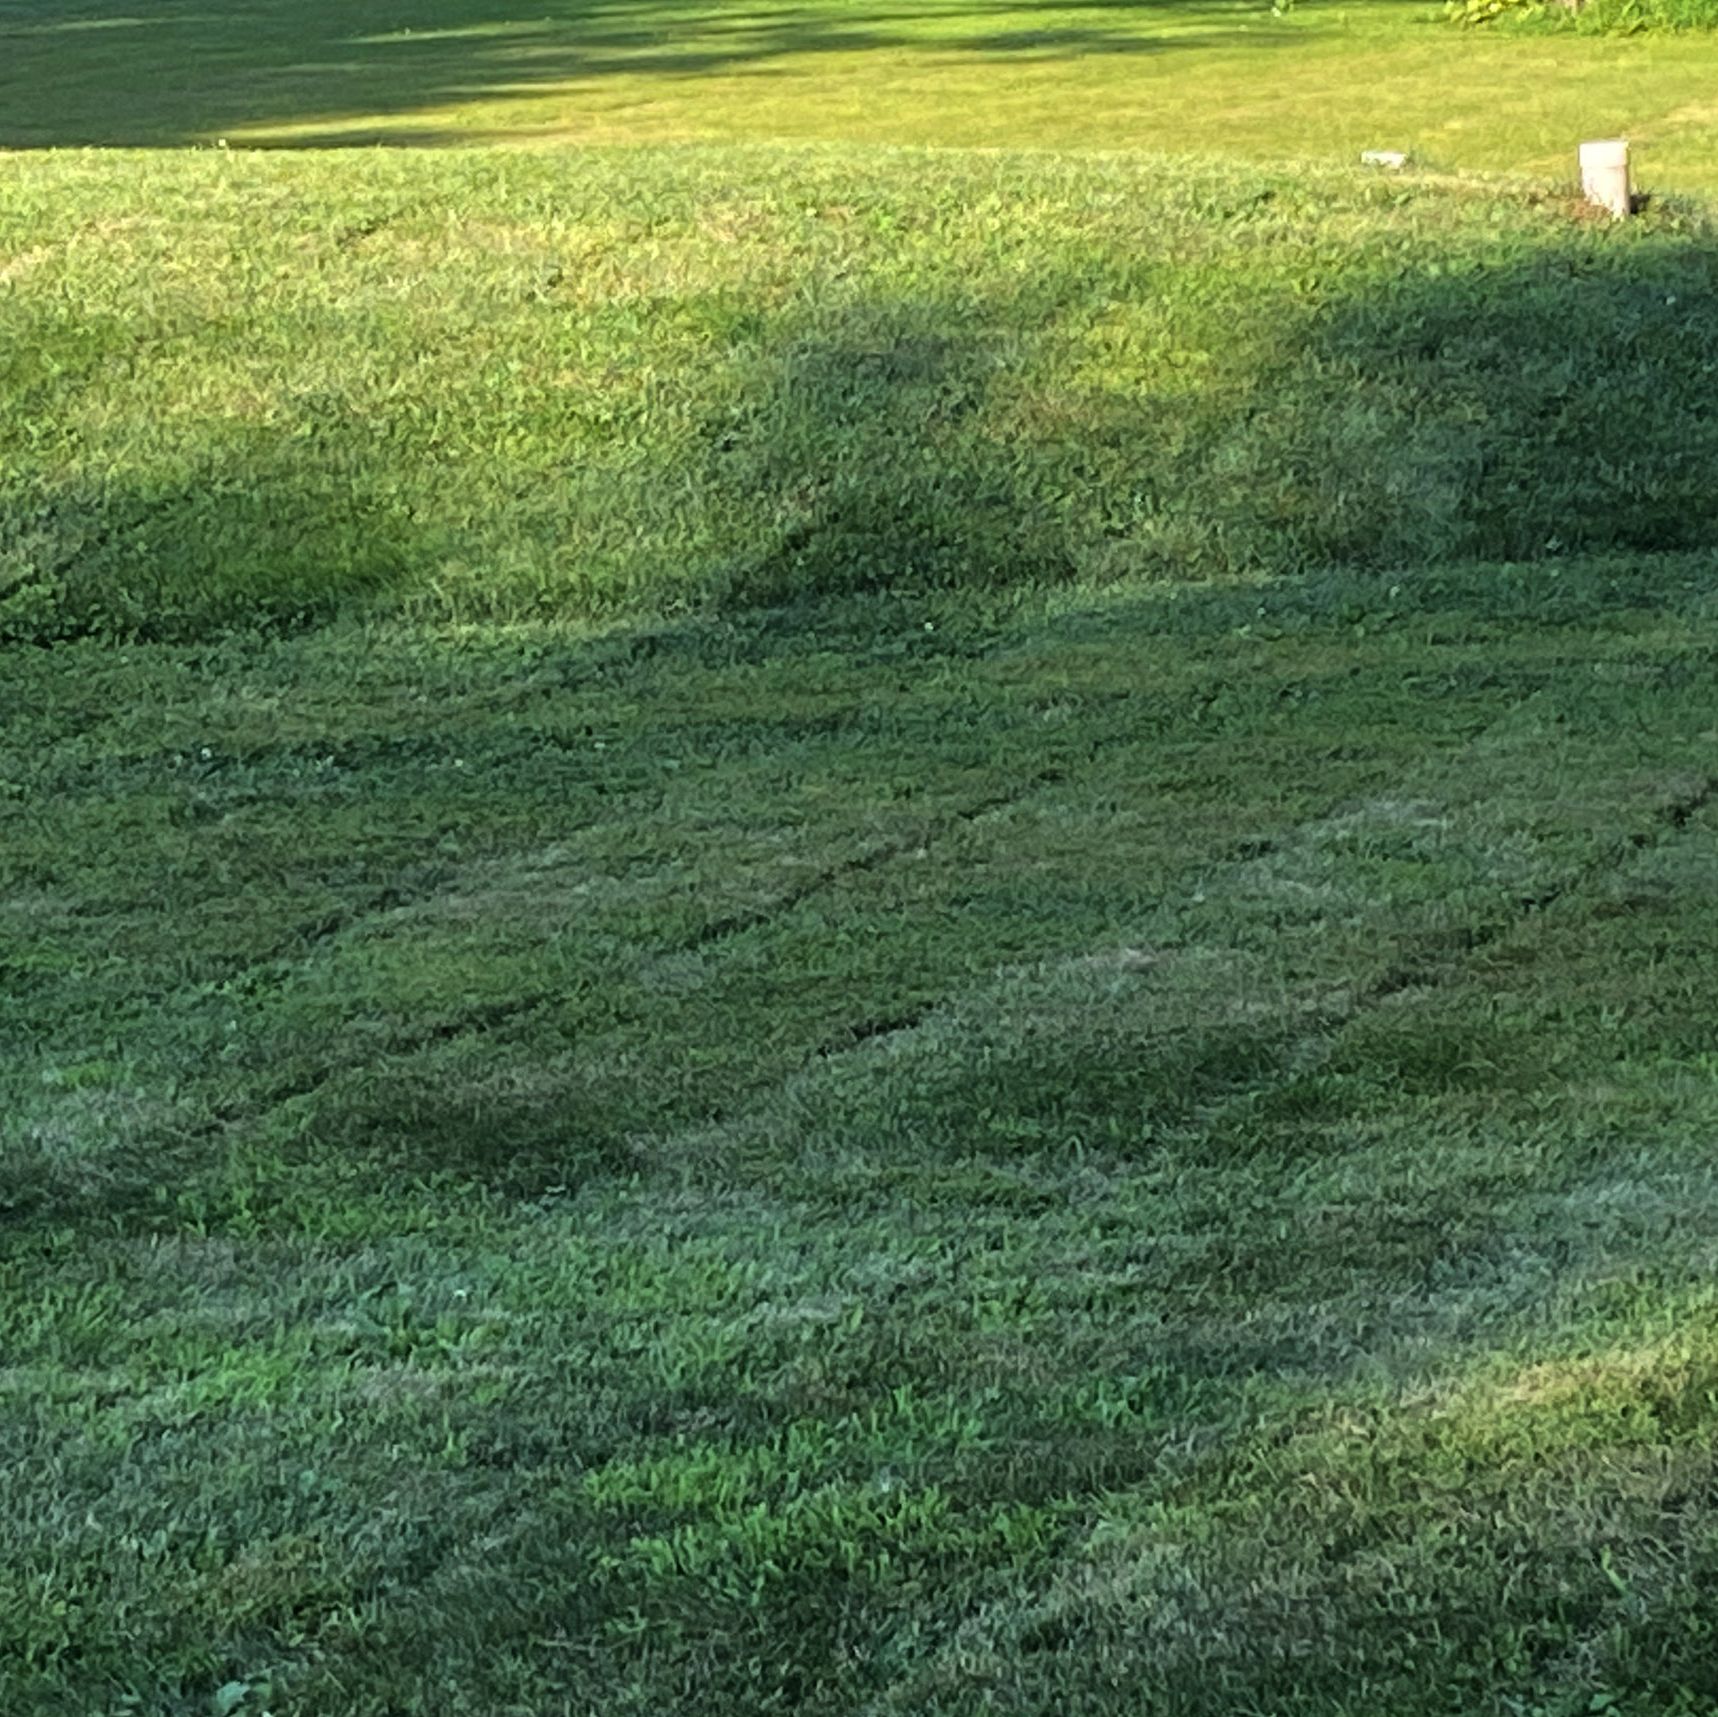 Tips for Making Beautiful, Neat Stripes on Your Lawn